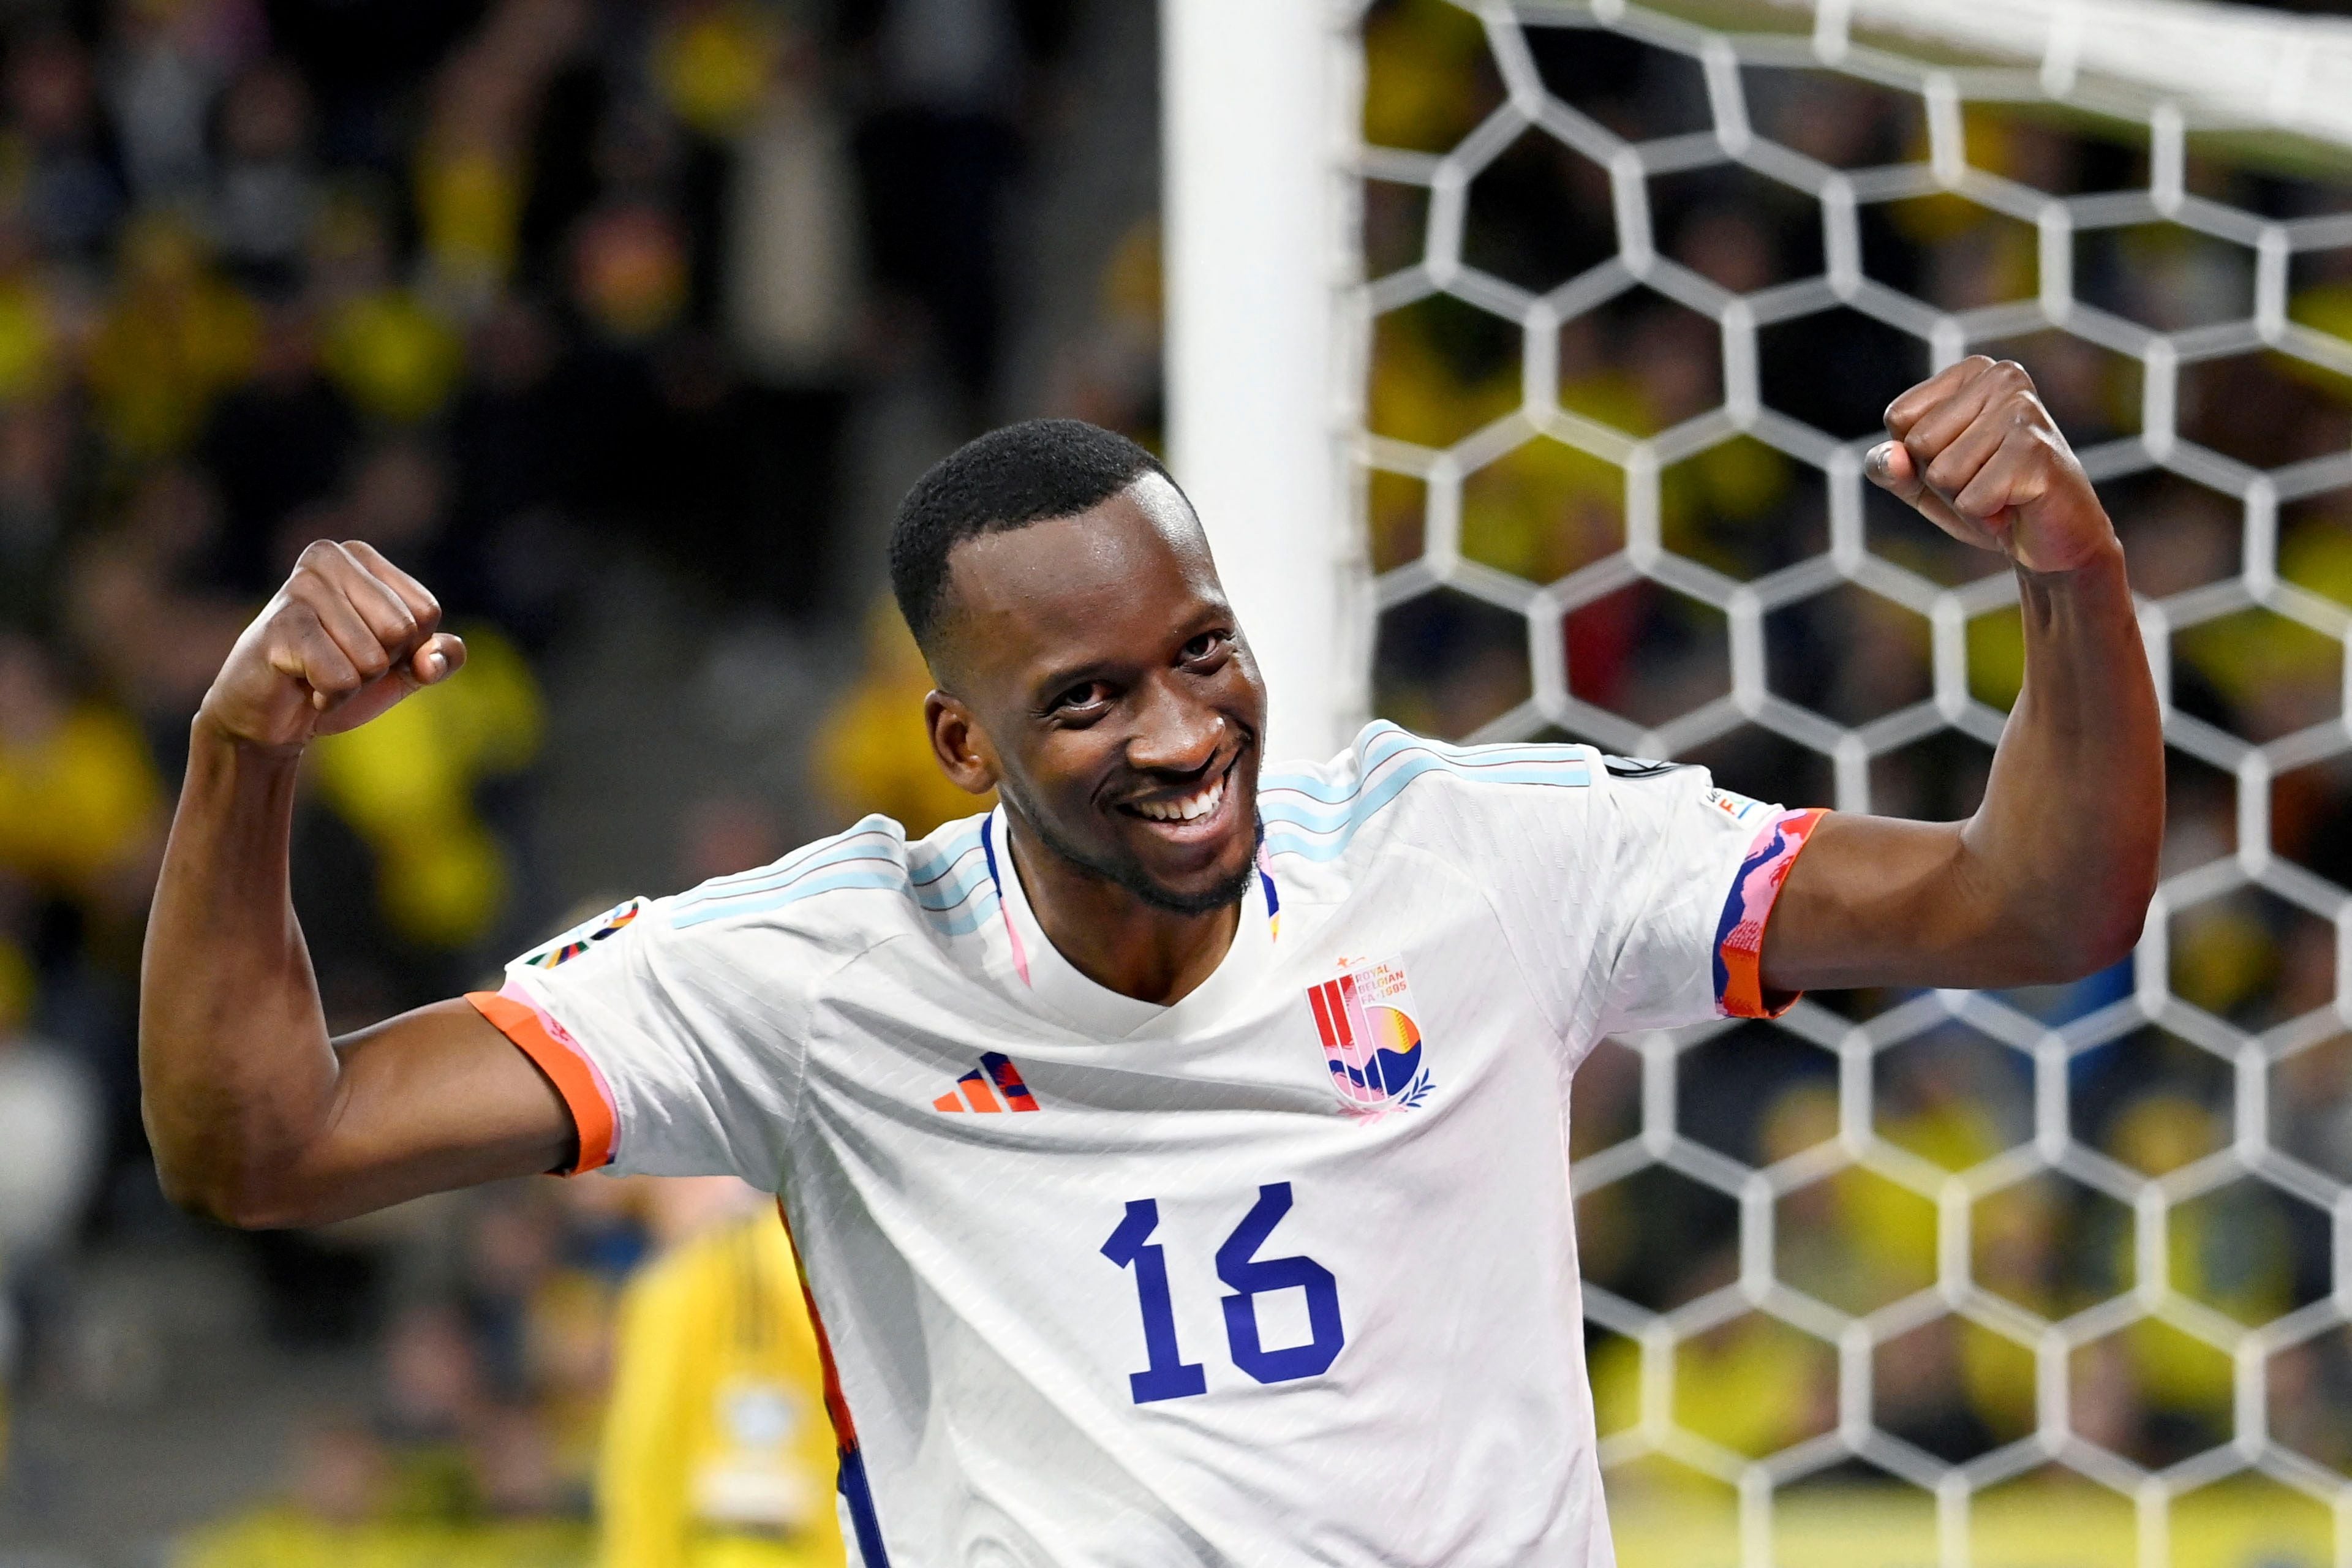 Soccer Football - UEFA EURO 2024 Qualifiers - Group F - Sweden v Belgium - Friends Arena, Solna, Sweden - March 24, 2023 Belgium's Dodi Lukebakio celebrates their second goal scored by Romelu Lukaku Maja Suslin/TT News Agency via REUTERS     ATTENTION EDITORS - THIS IMAGE WAS PROVIDED BY A THIRD PARTY. SWEDEN OUT. NO COMMERCIAL OR EDITORIAL SALES IN SWEDEN.